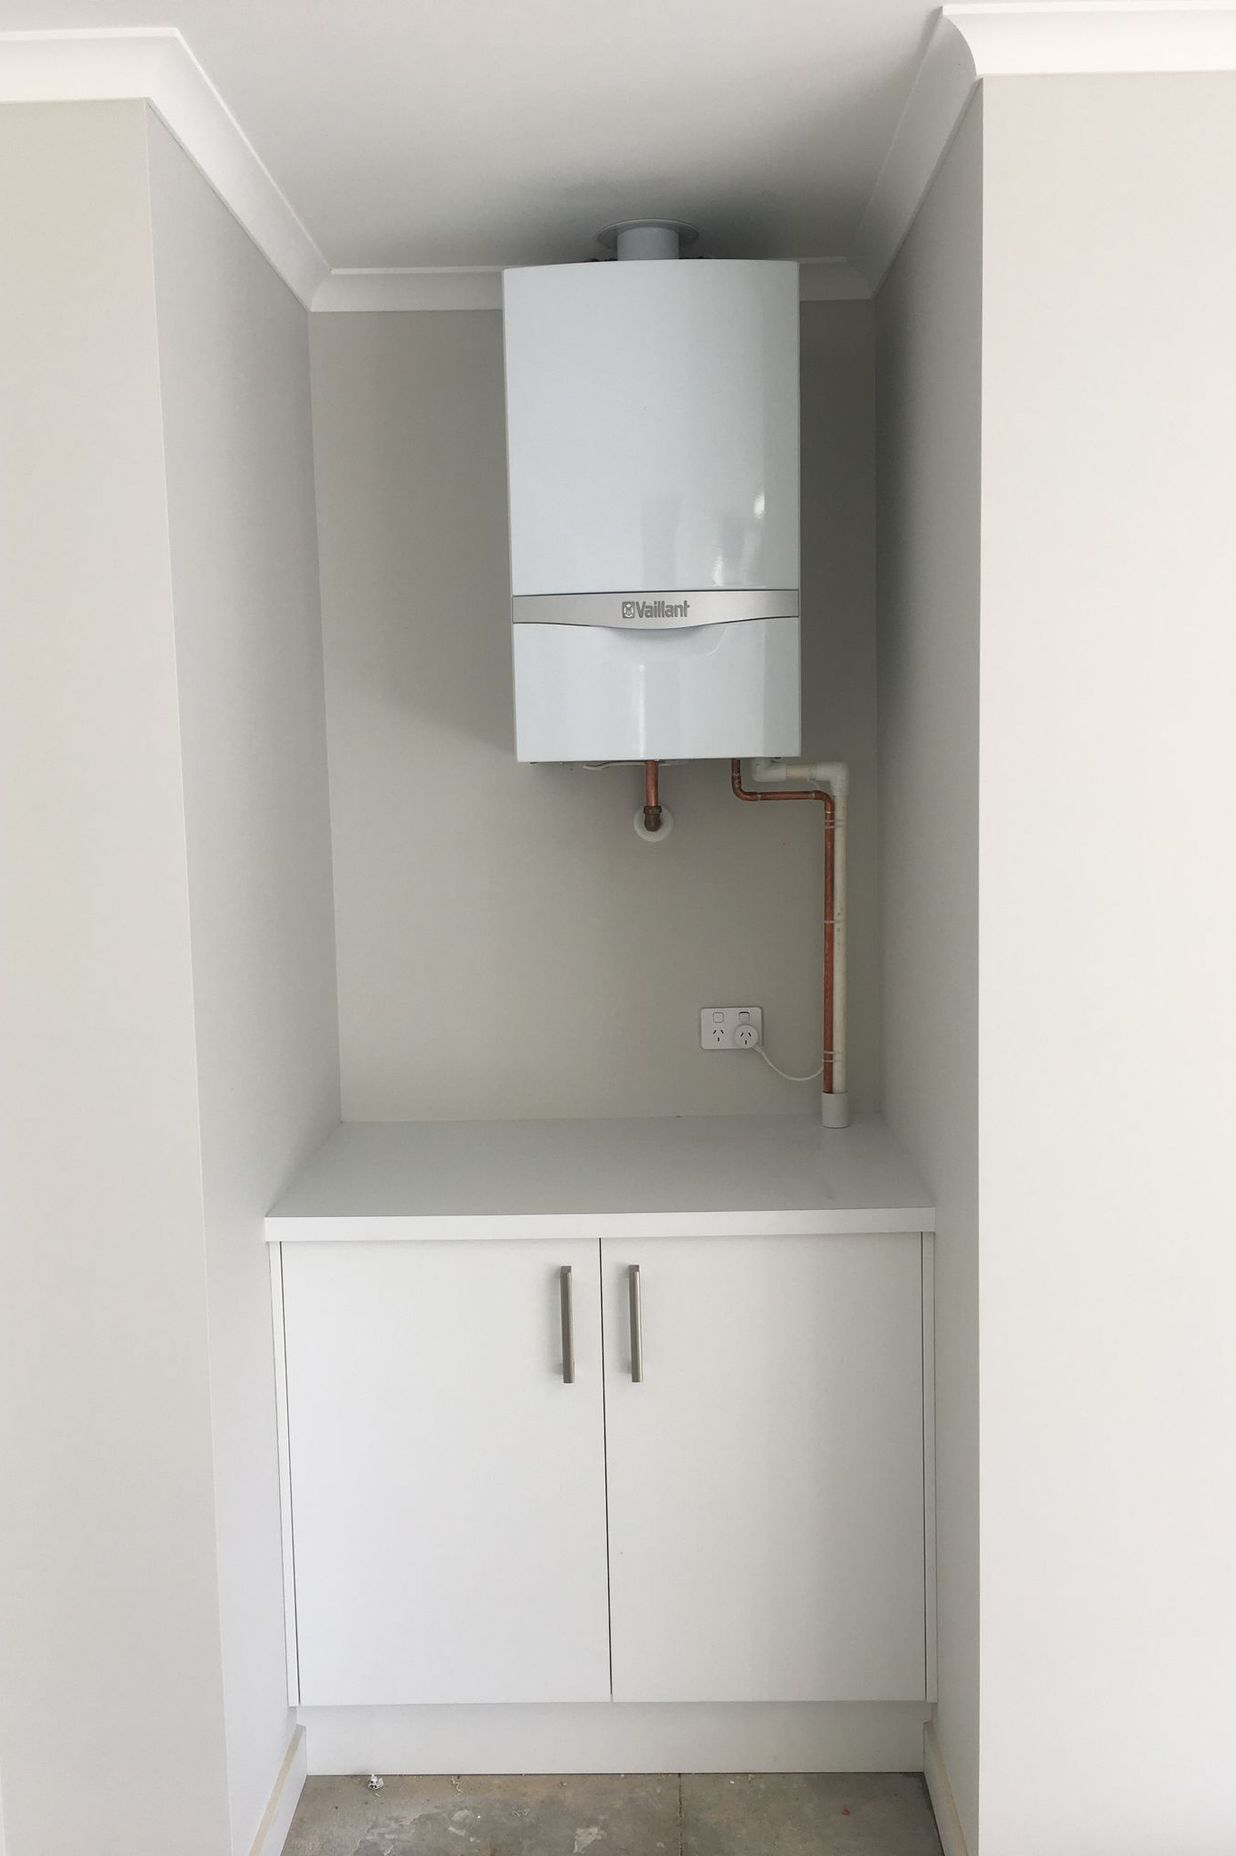 Residential Central Heating